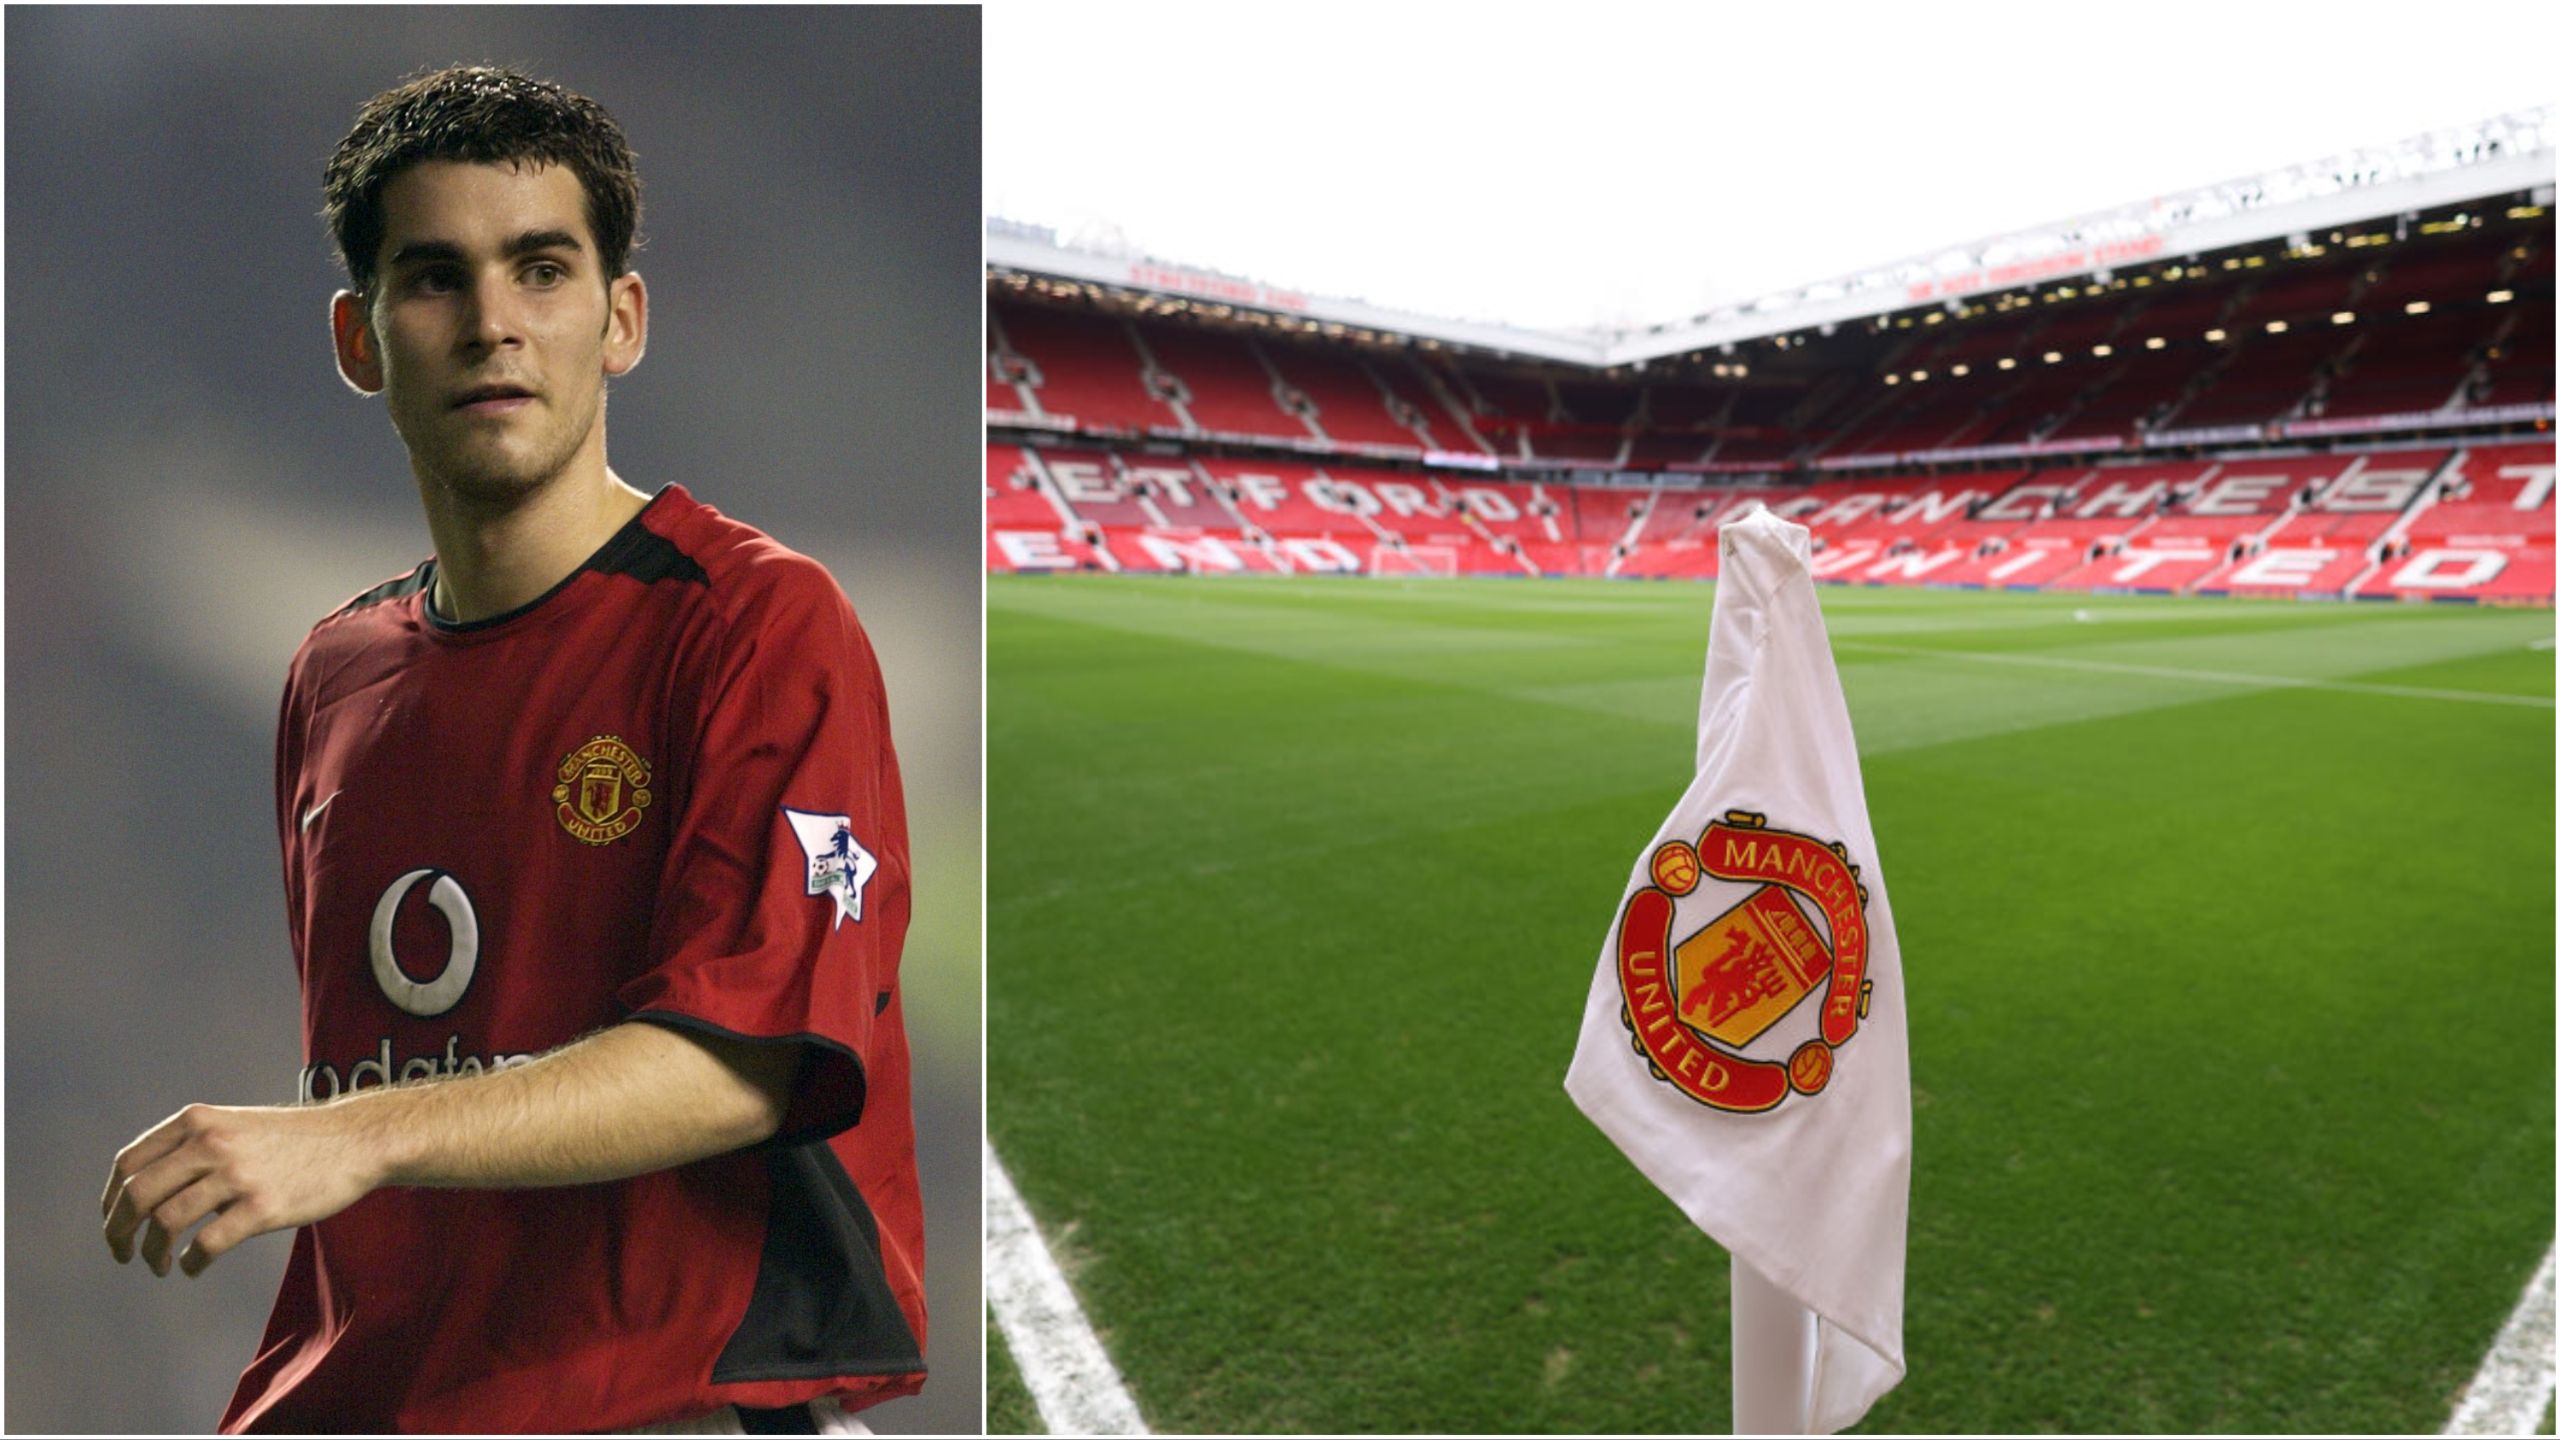 Man Utd: Daniel Nardiello says he was forced to perform sex act in front of whole team